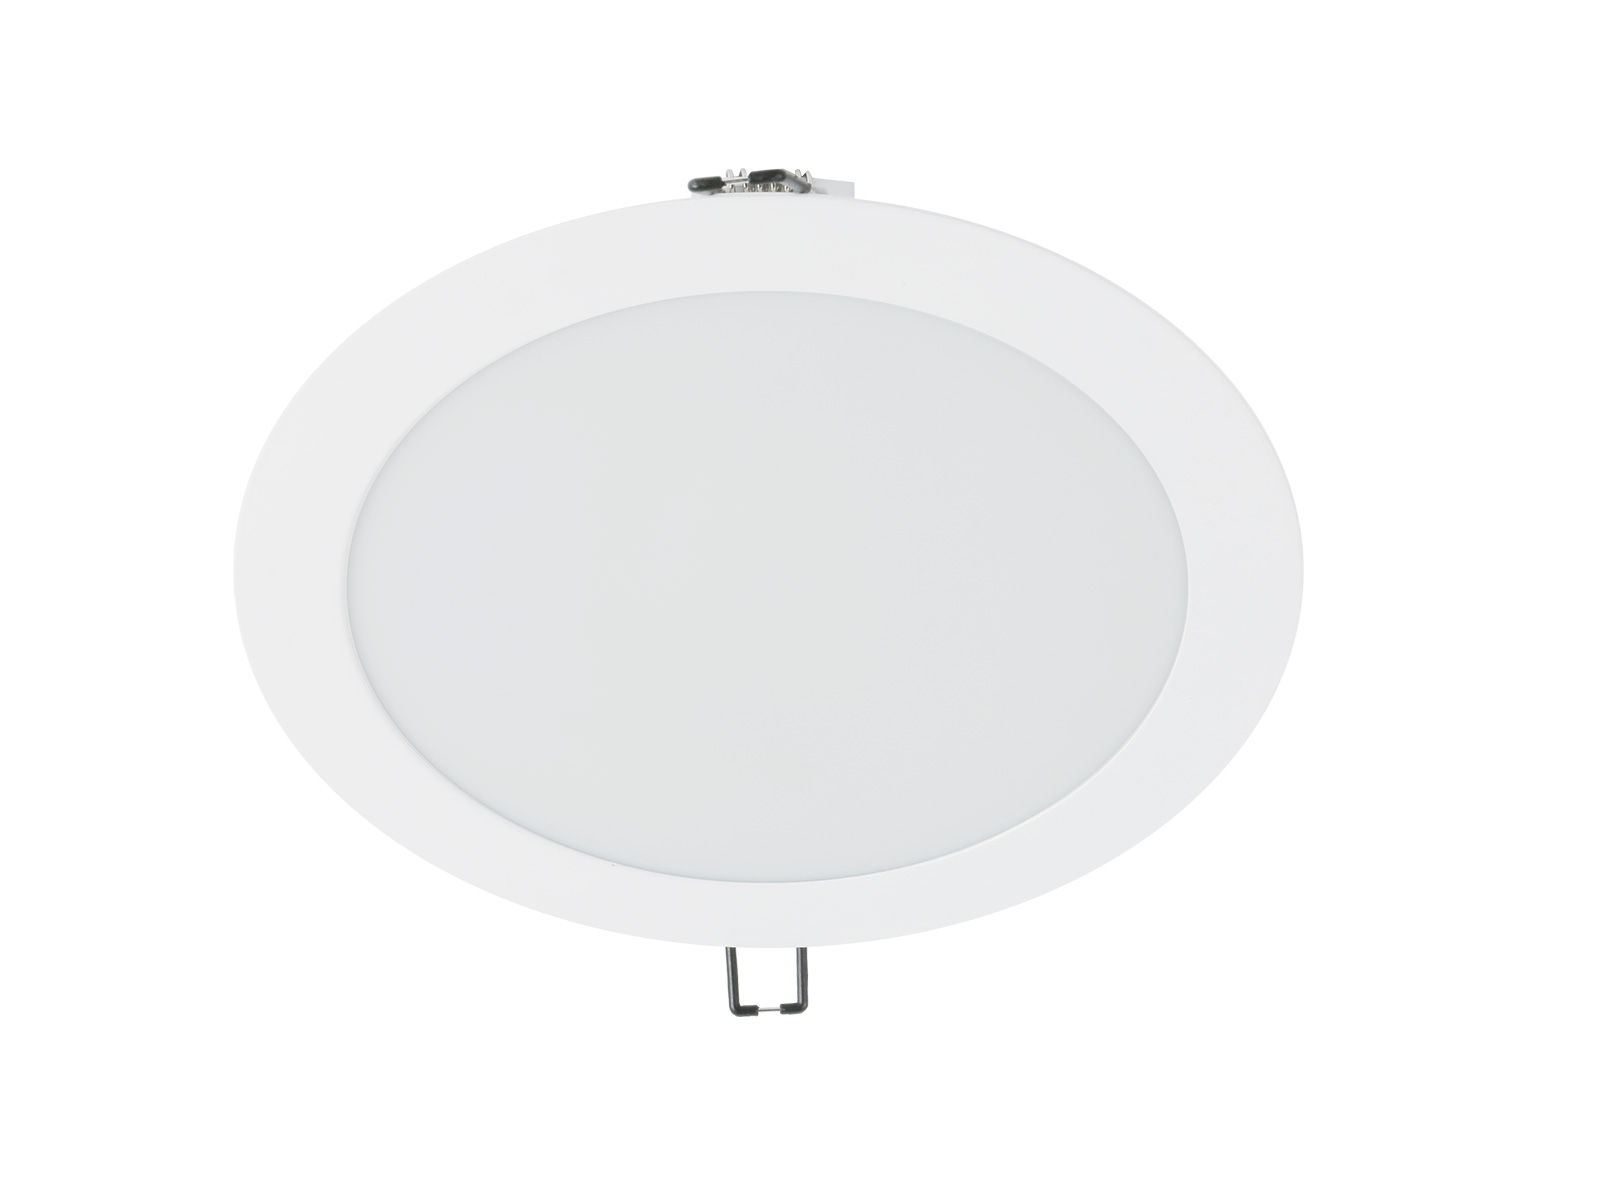 PL-DD Ultra Slim Design small Round and Square Panel Light with Interchangeable CCT